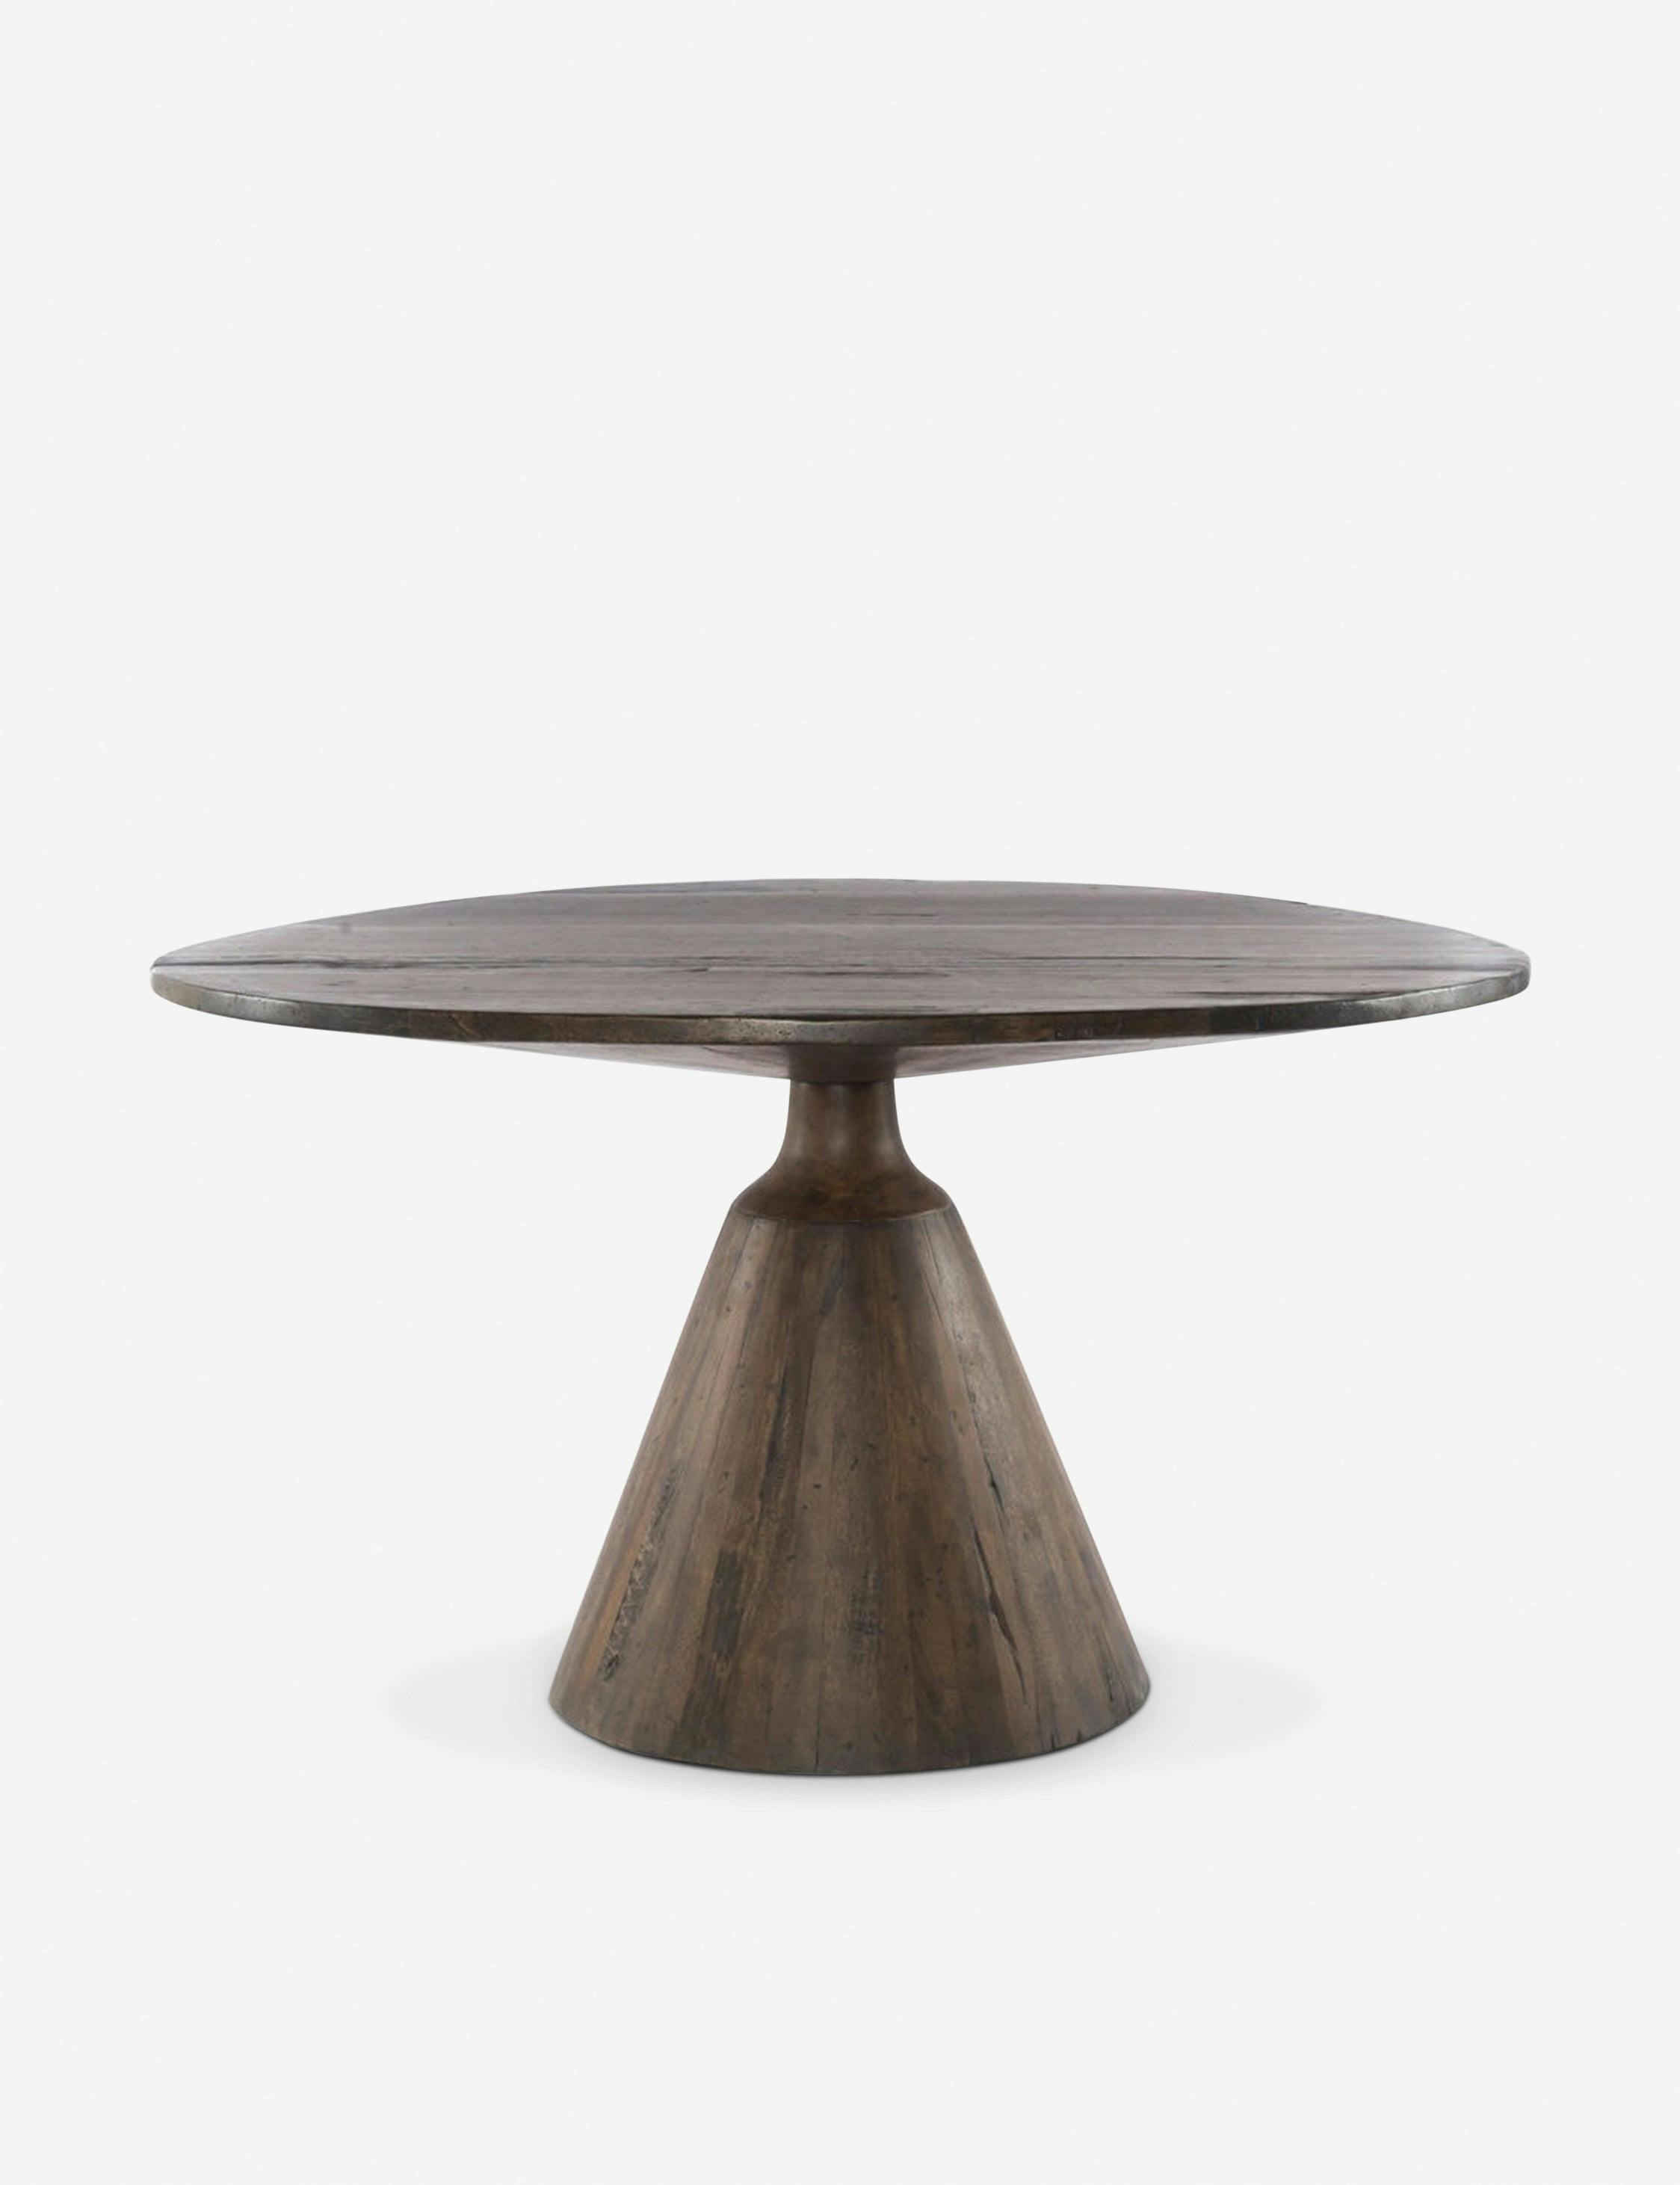 Reclaimed Wood & Marble Round Rustic Dining Table for Six